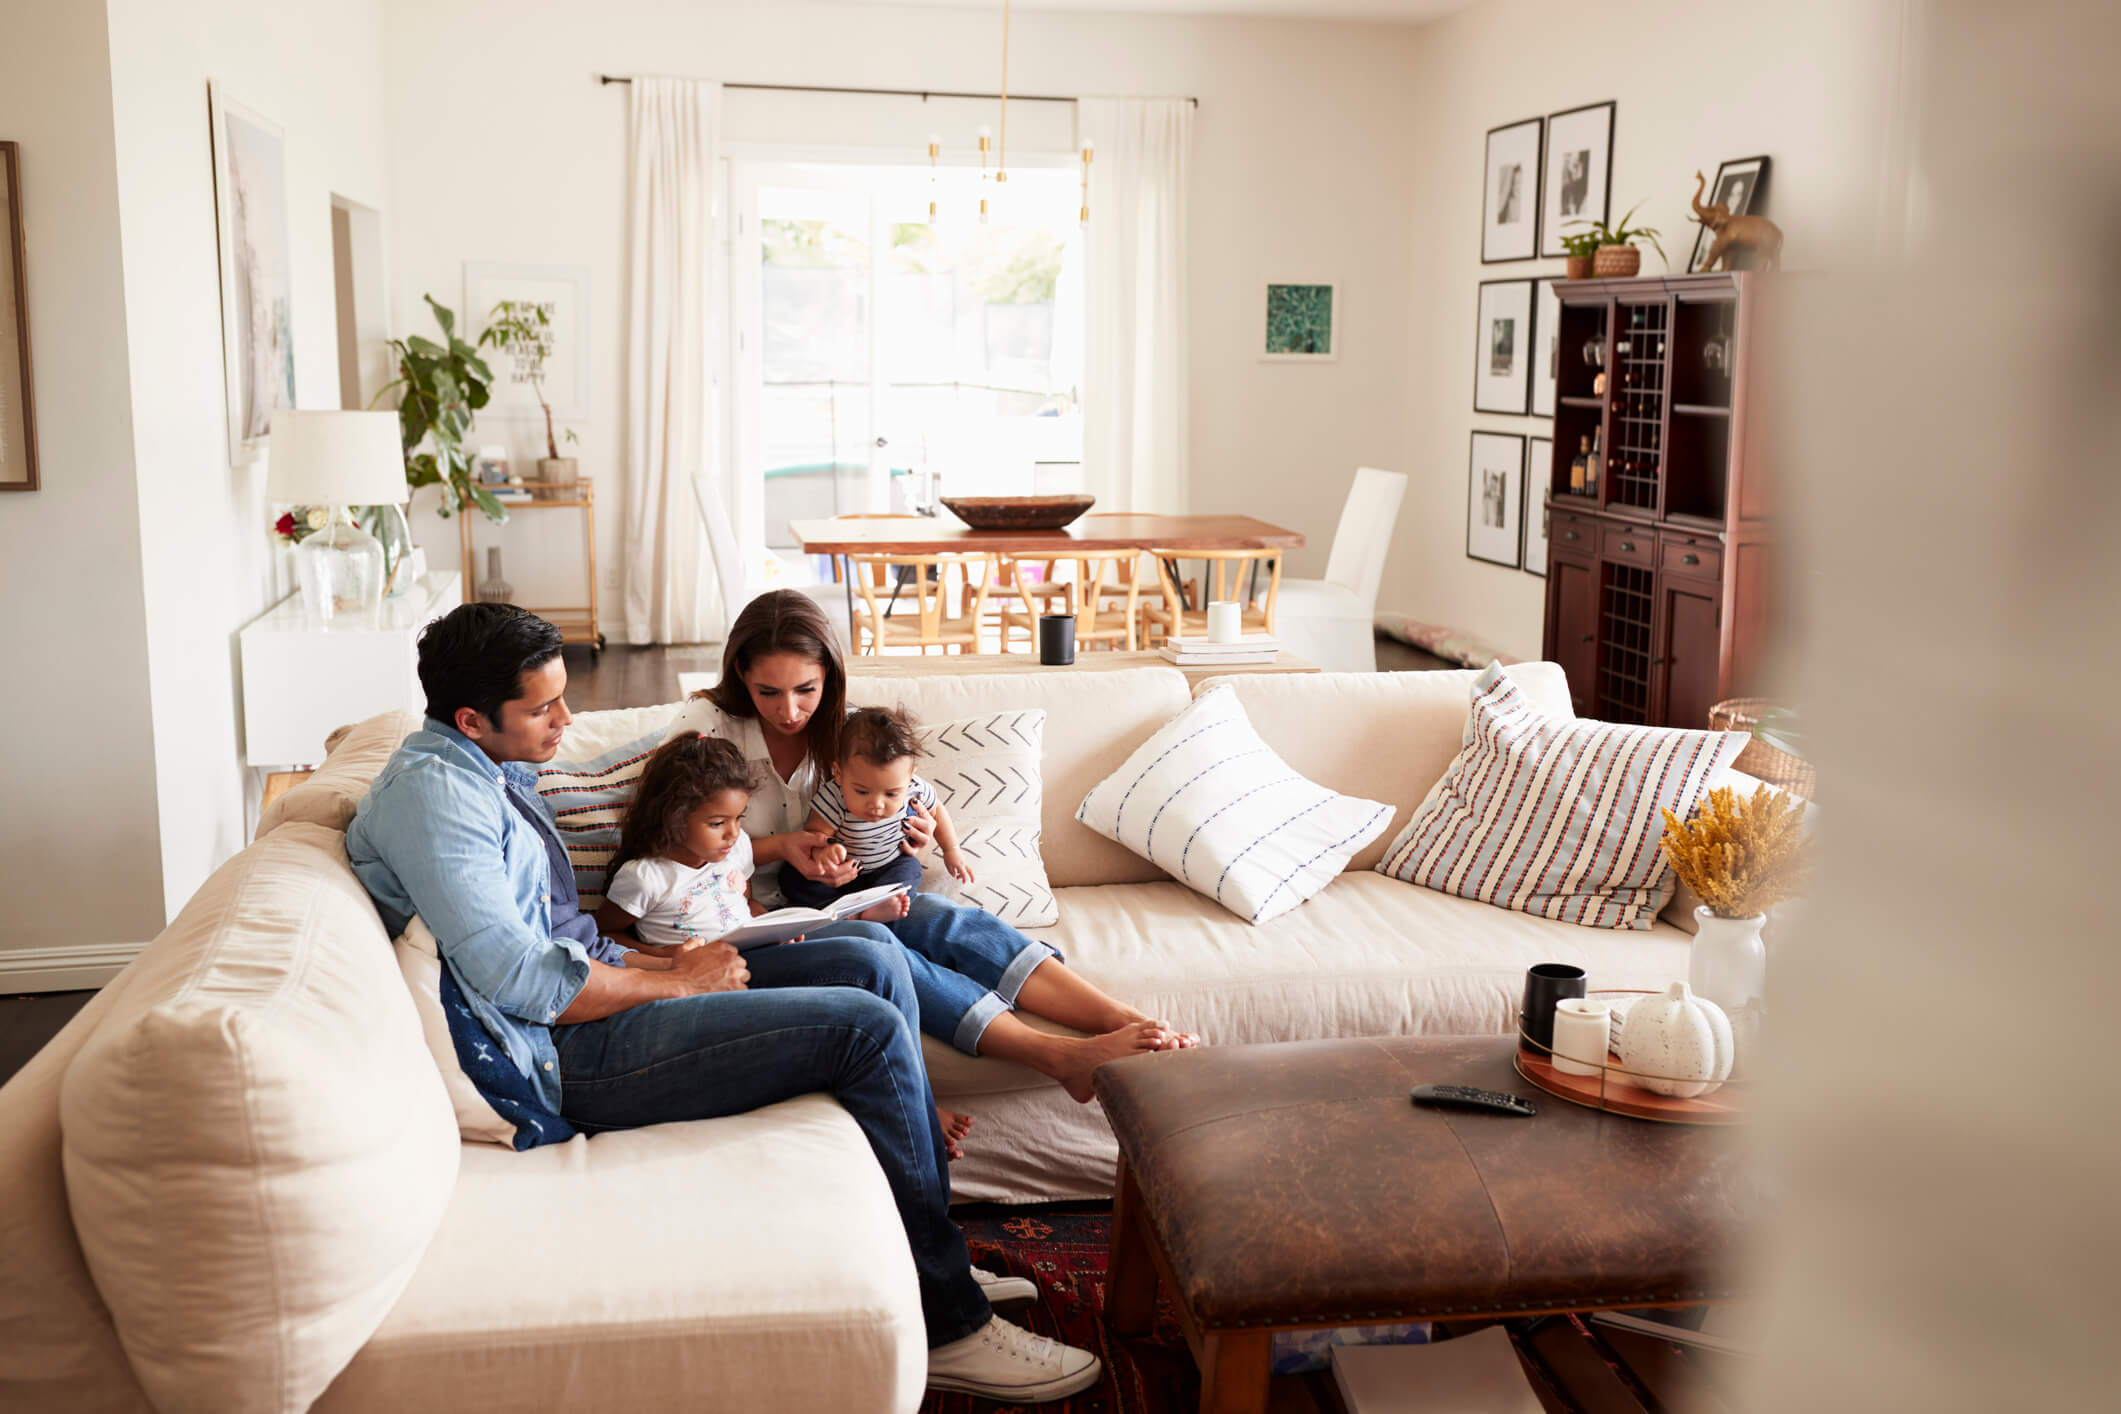 A family reads to their young children in their comfortable home on their couch